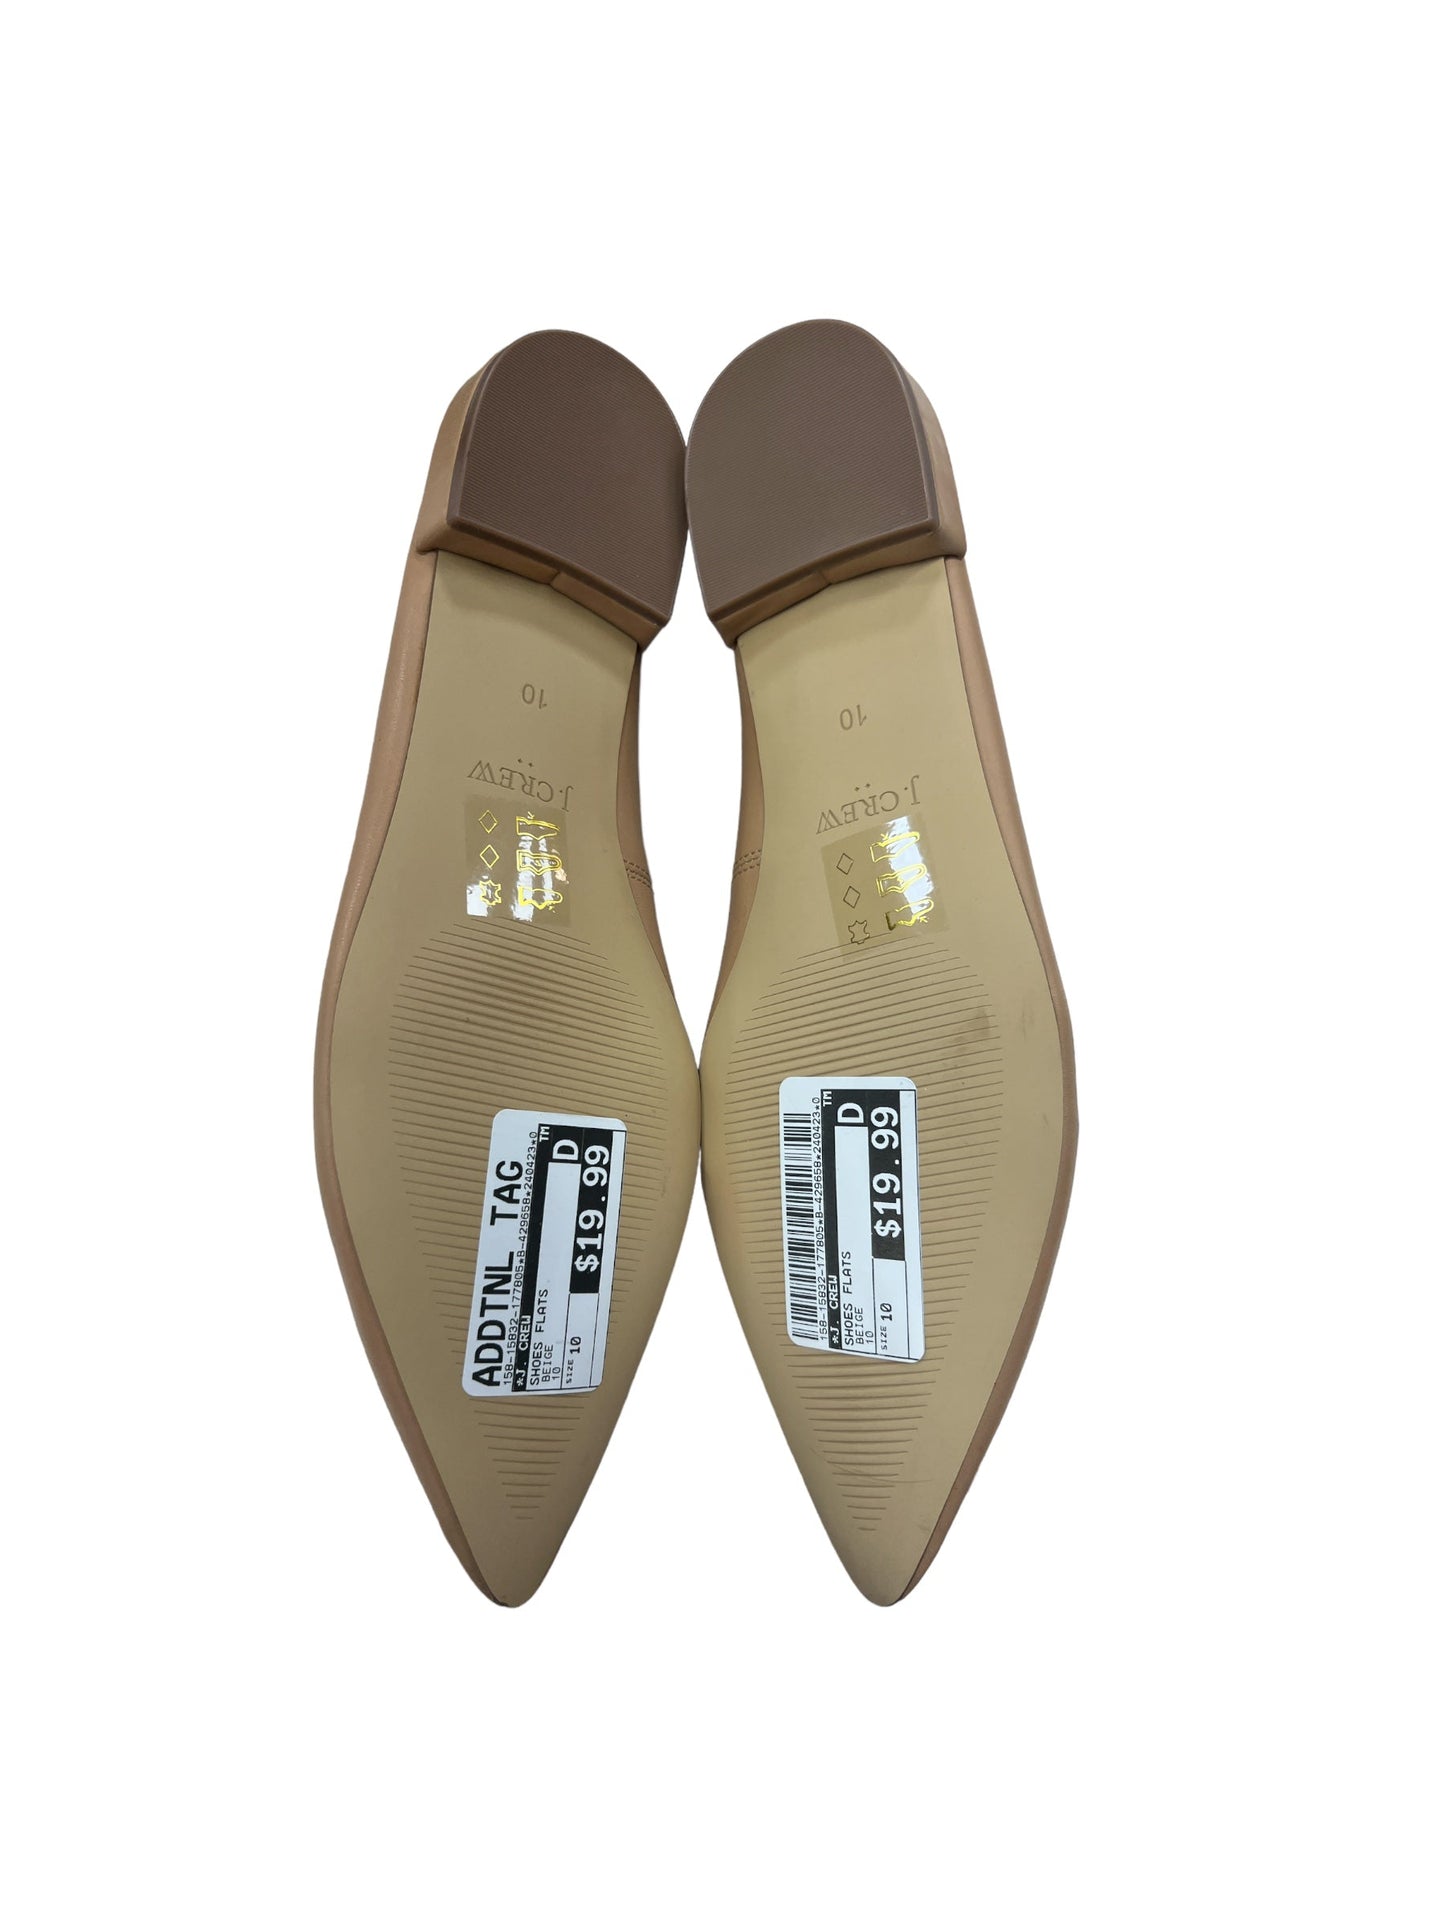 Shoes Flats By J. Crew  Size: 10